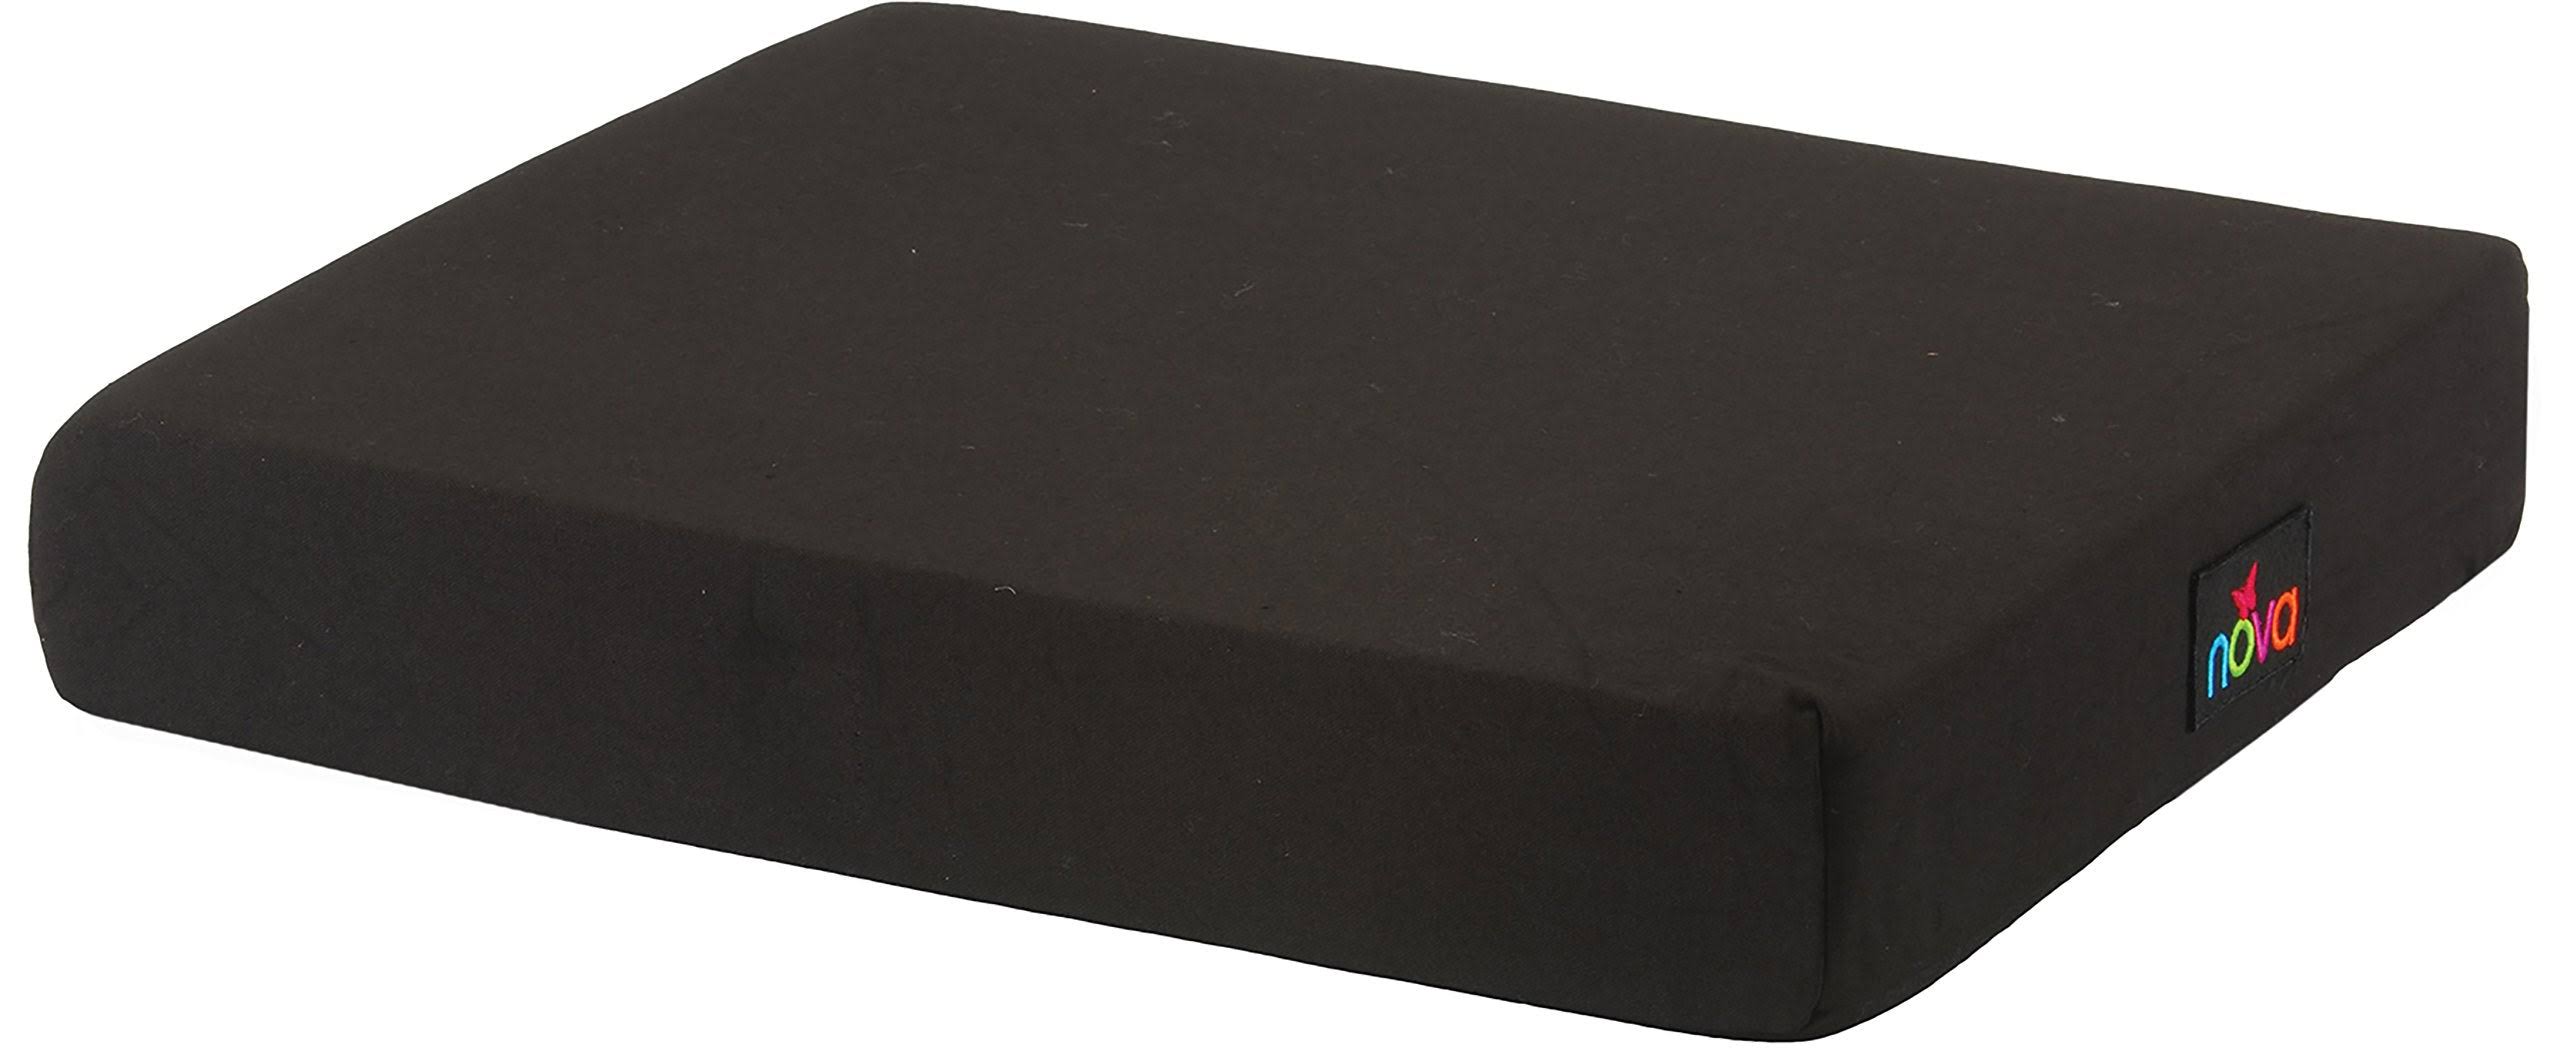 Nova Medical Products Foam Cushion With Cover - Black